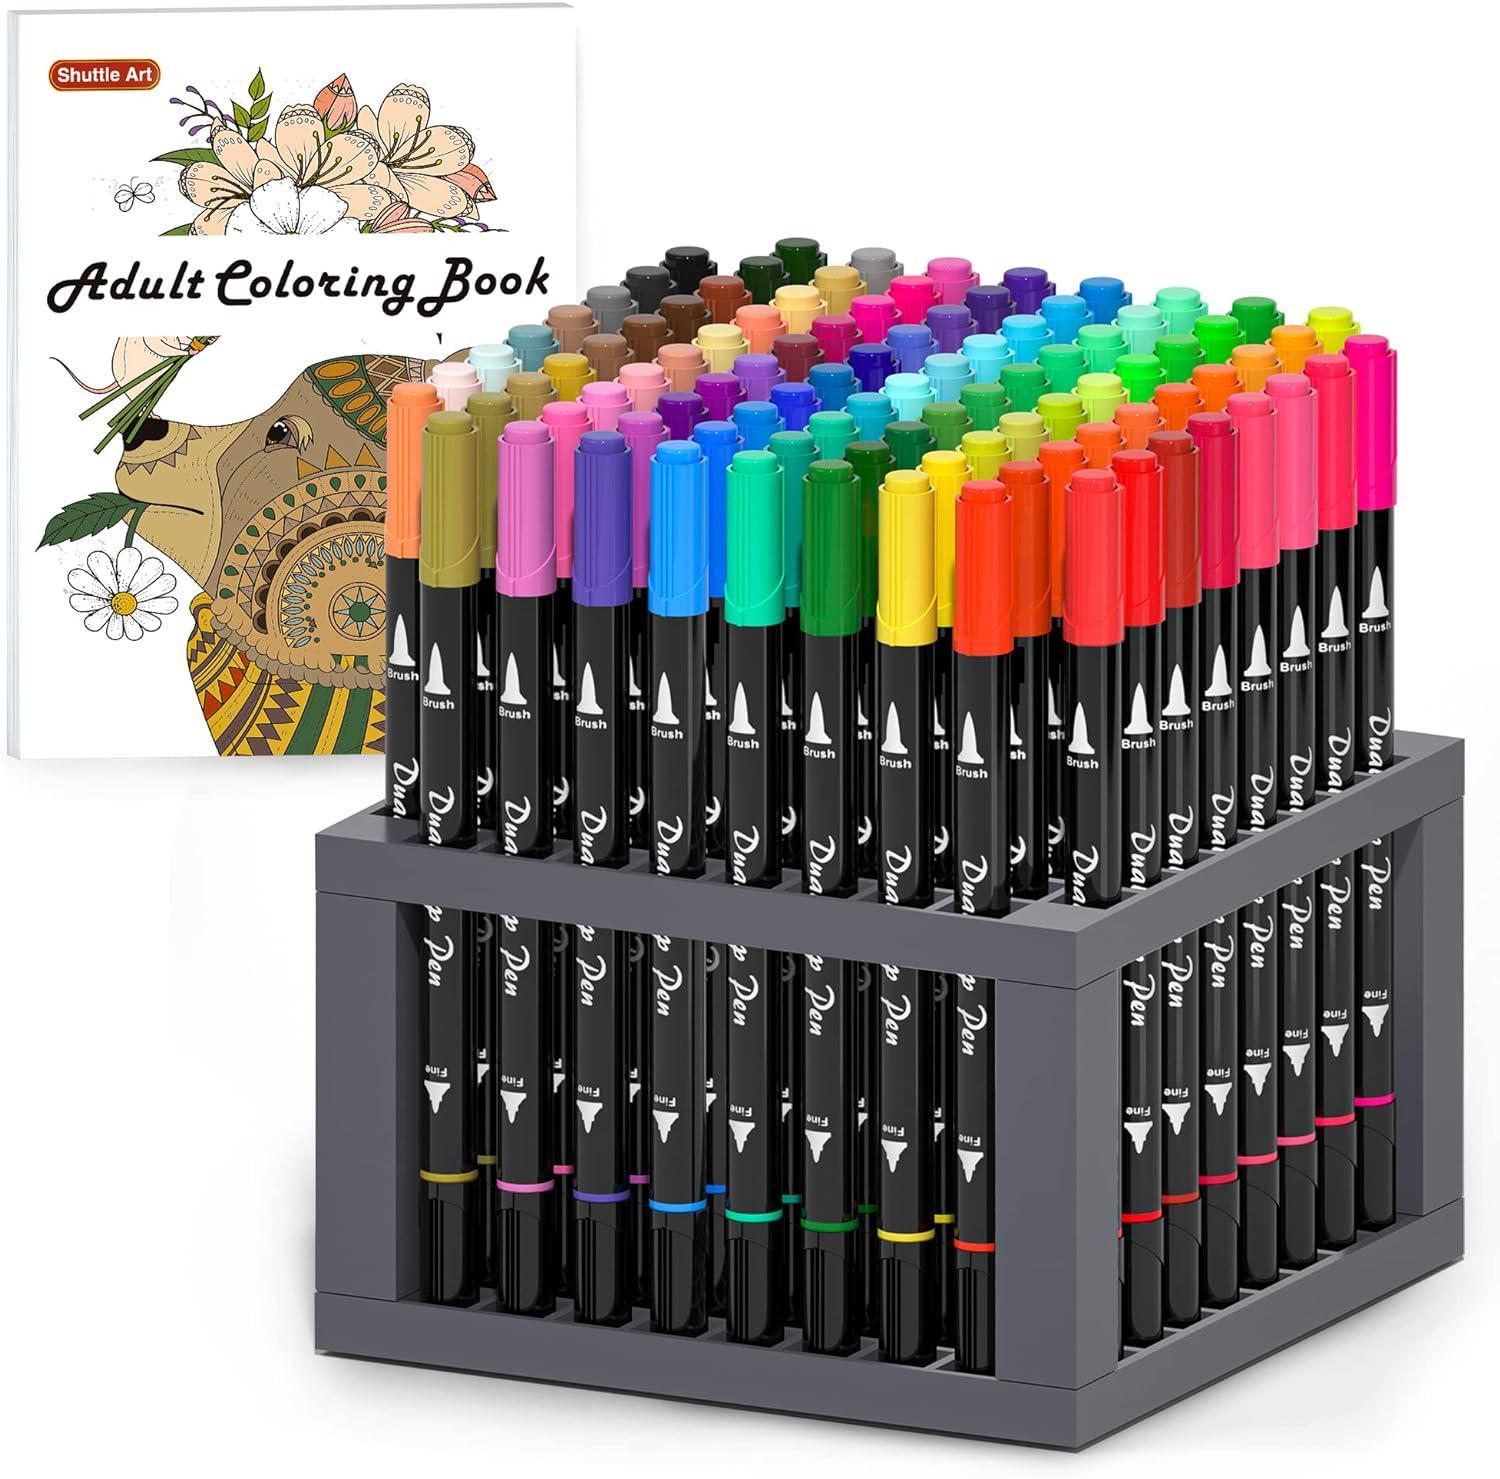 ZSCM 32 Colors Duo Tip Brush Markers Art Pen Set, Artist Fine and